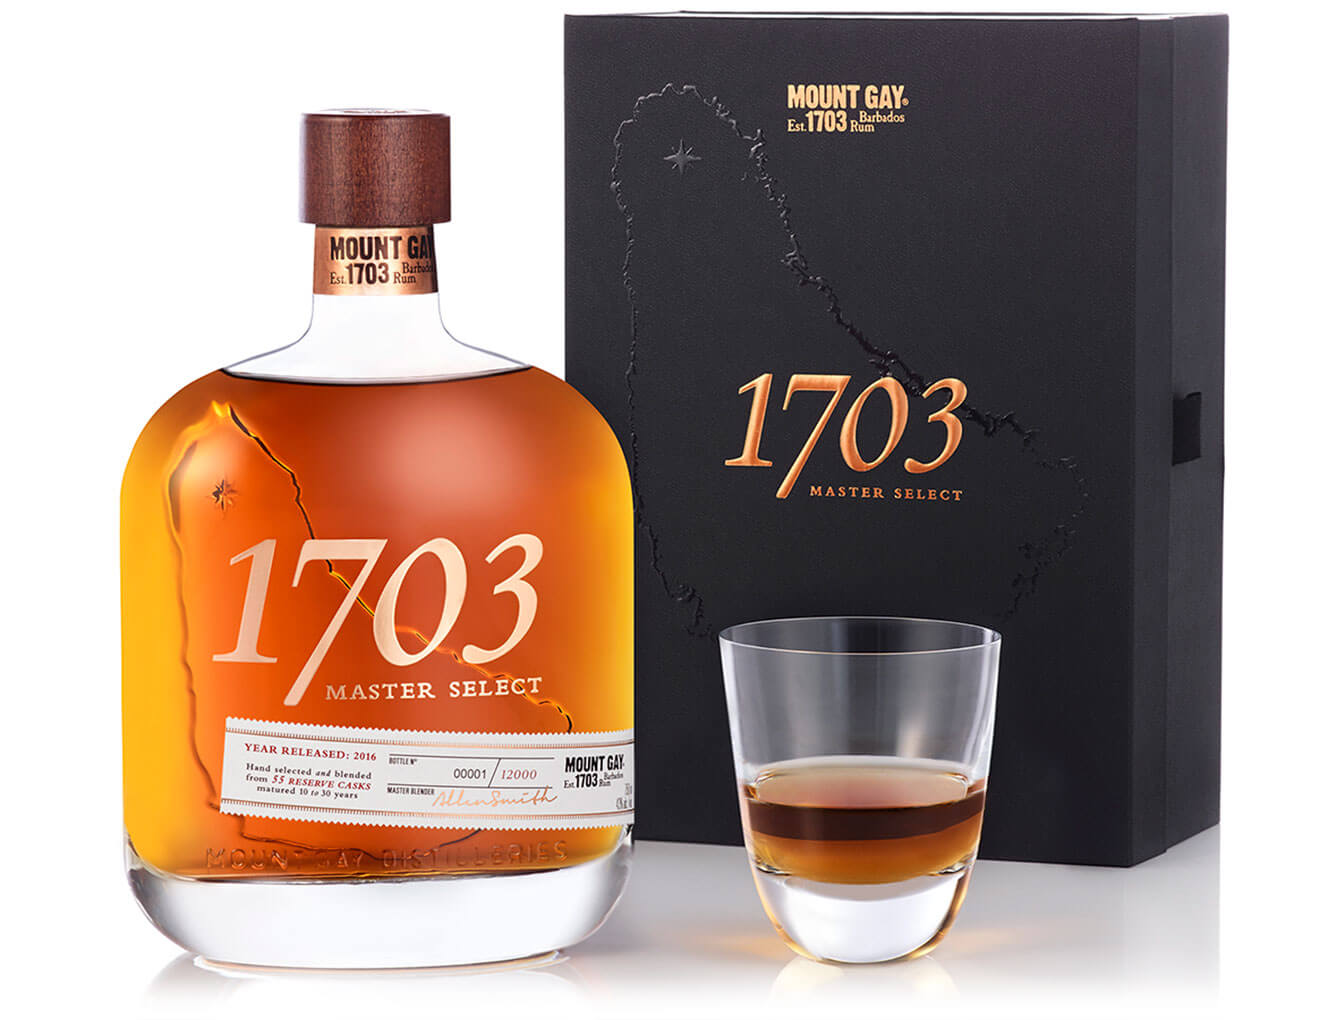 Mount Gay Releases its Rarest Rum: 1703 Master Select